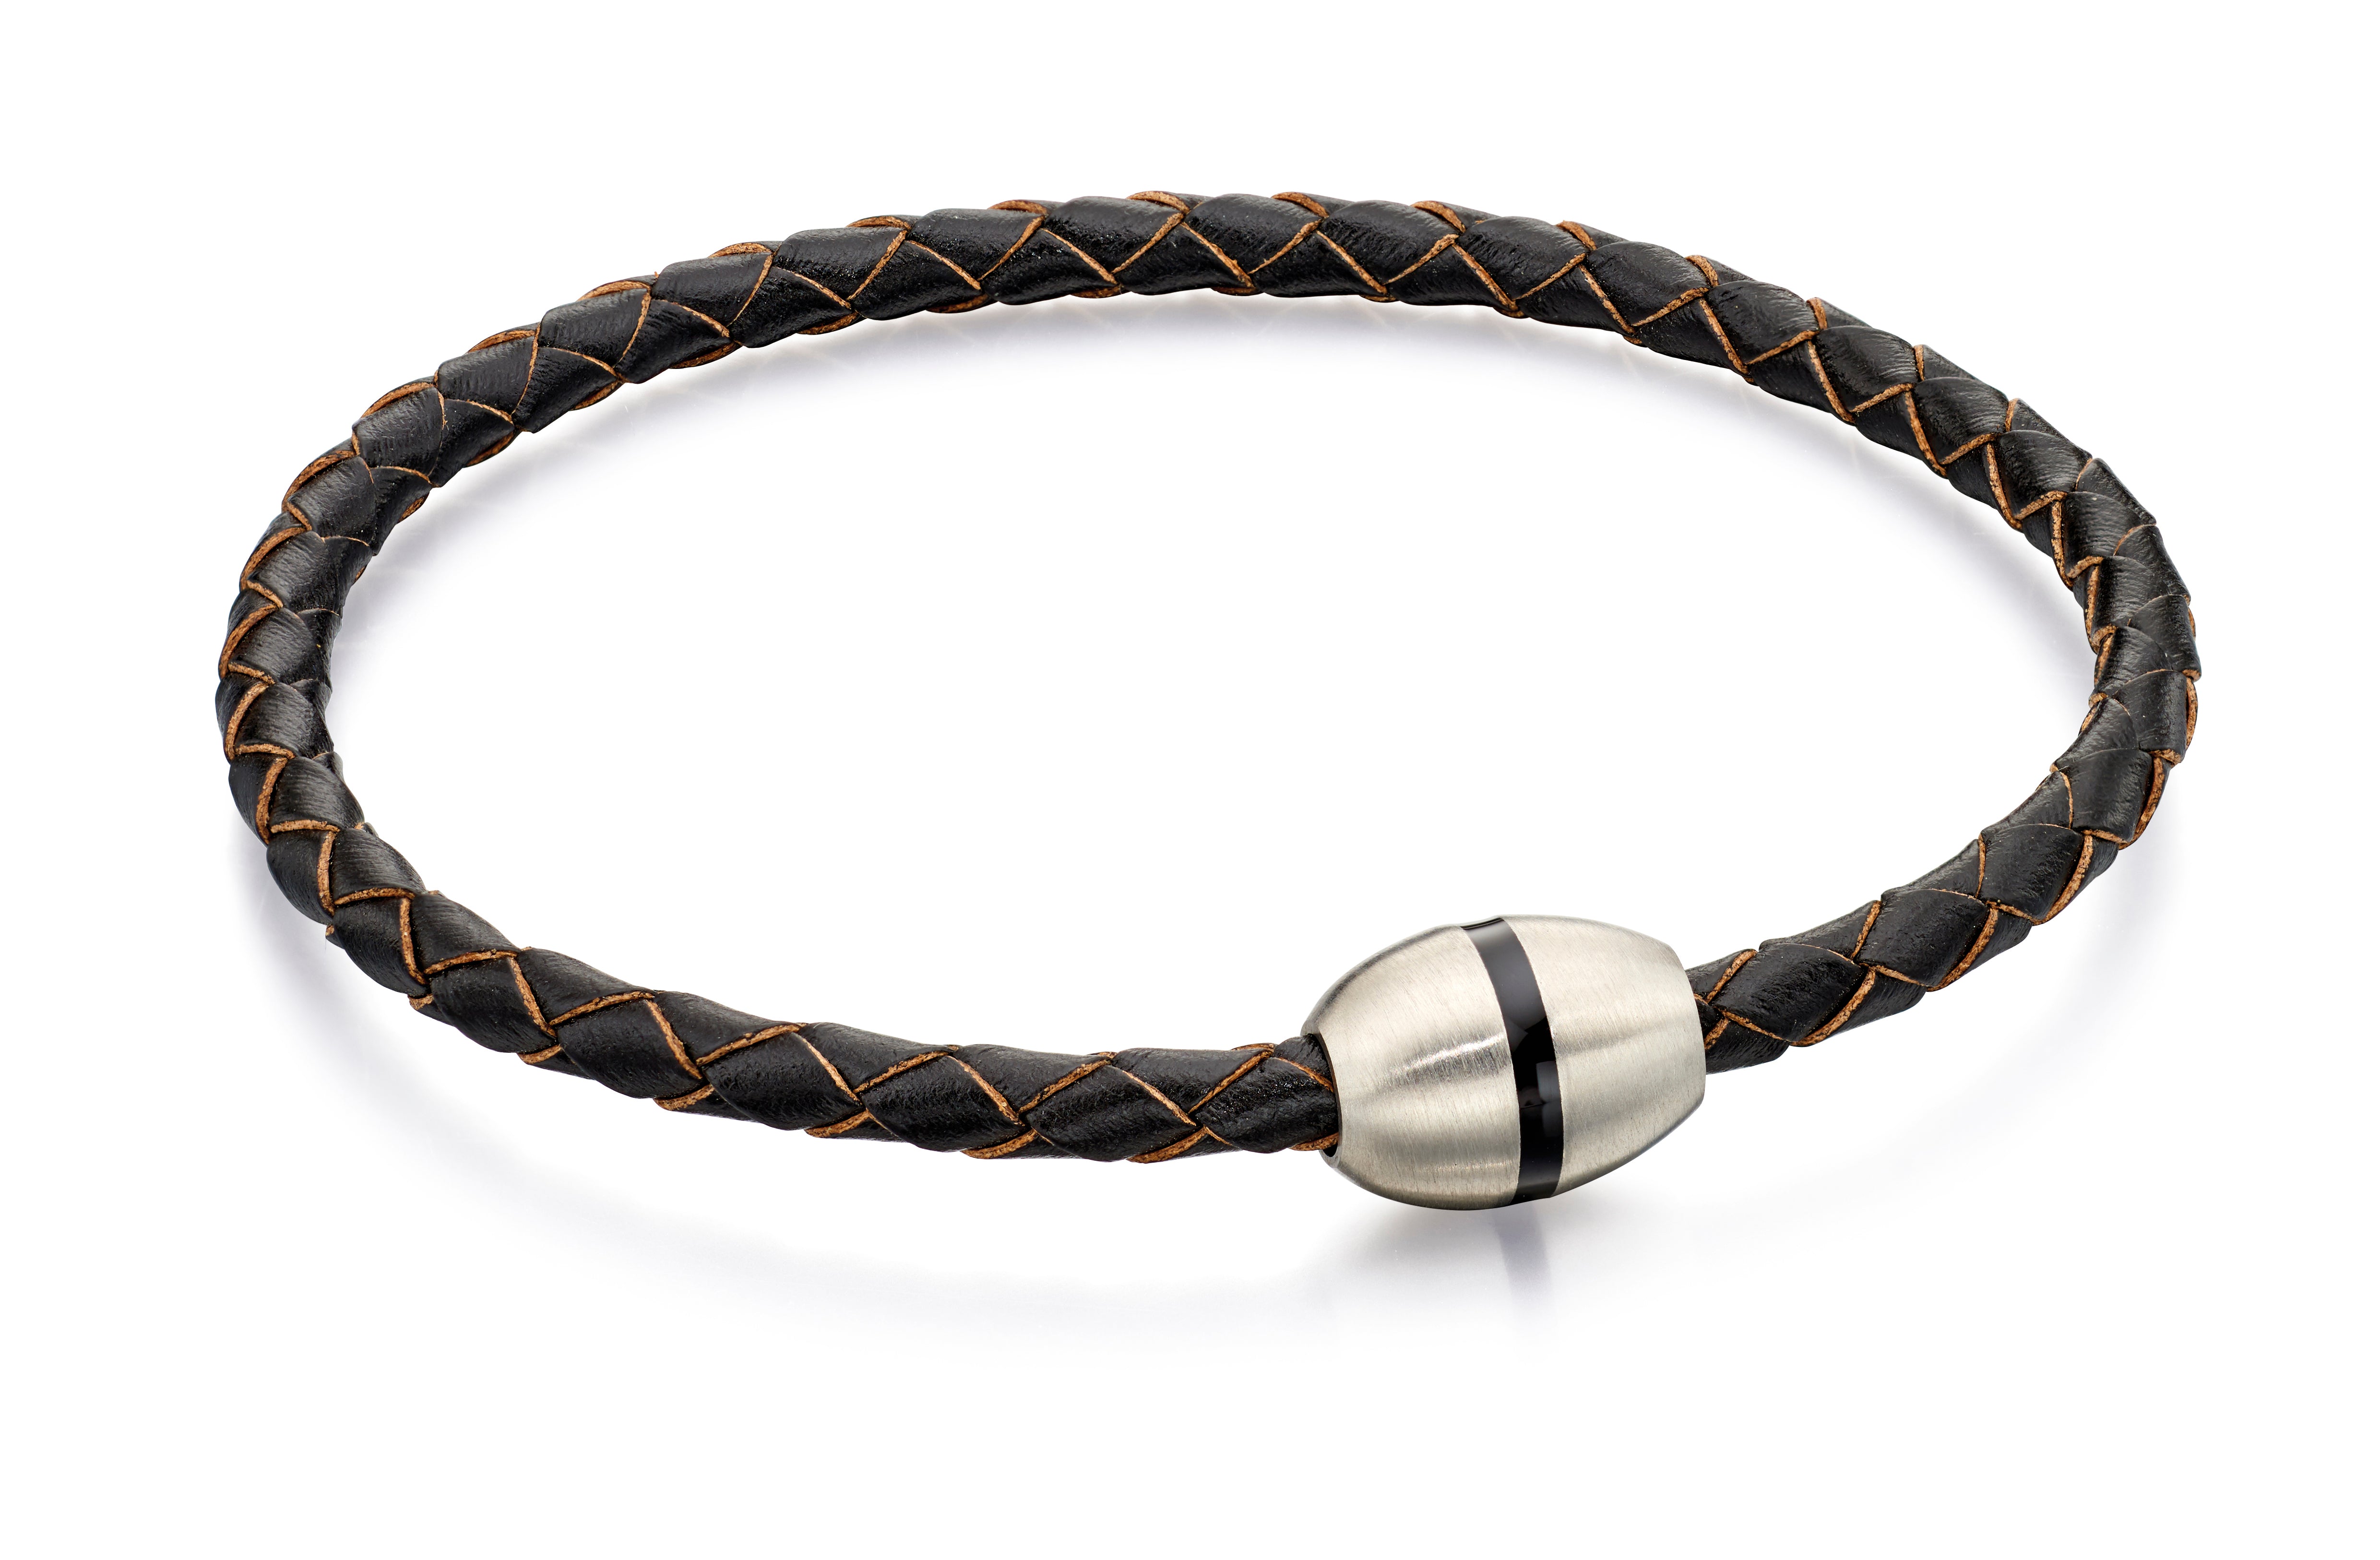 Brushed Stainless Steel & Dark Brown Leather Bracelet - FB0017 - Hallmark Jewellers Formby & The Jewellers Bench Widnes